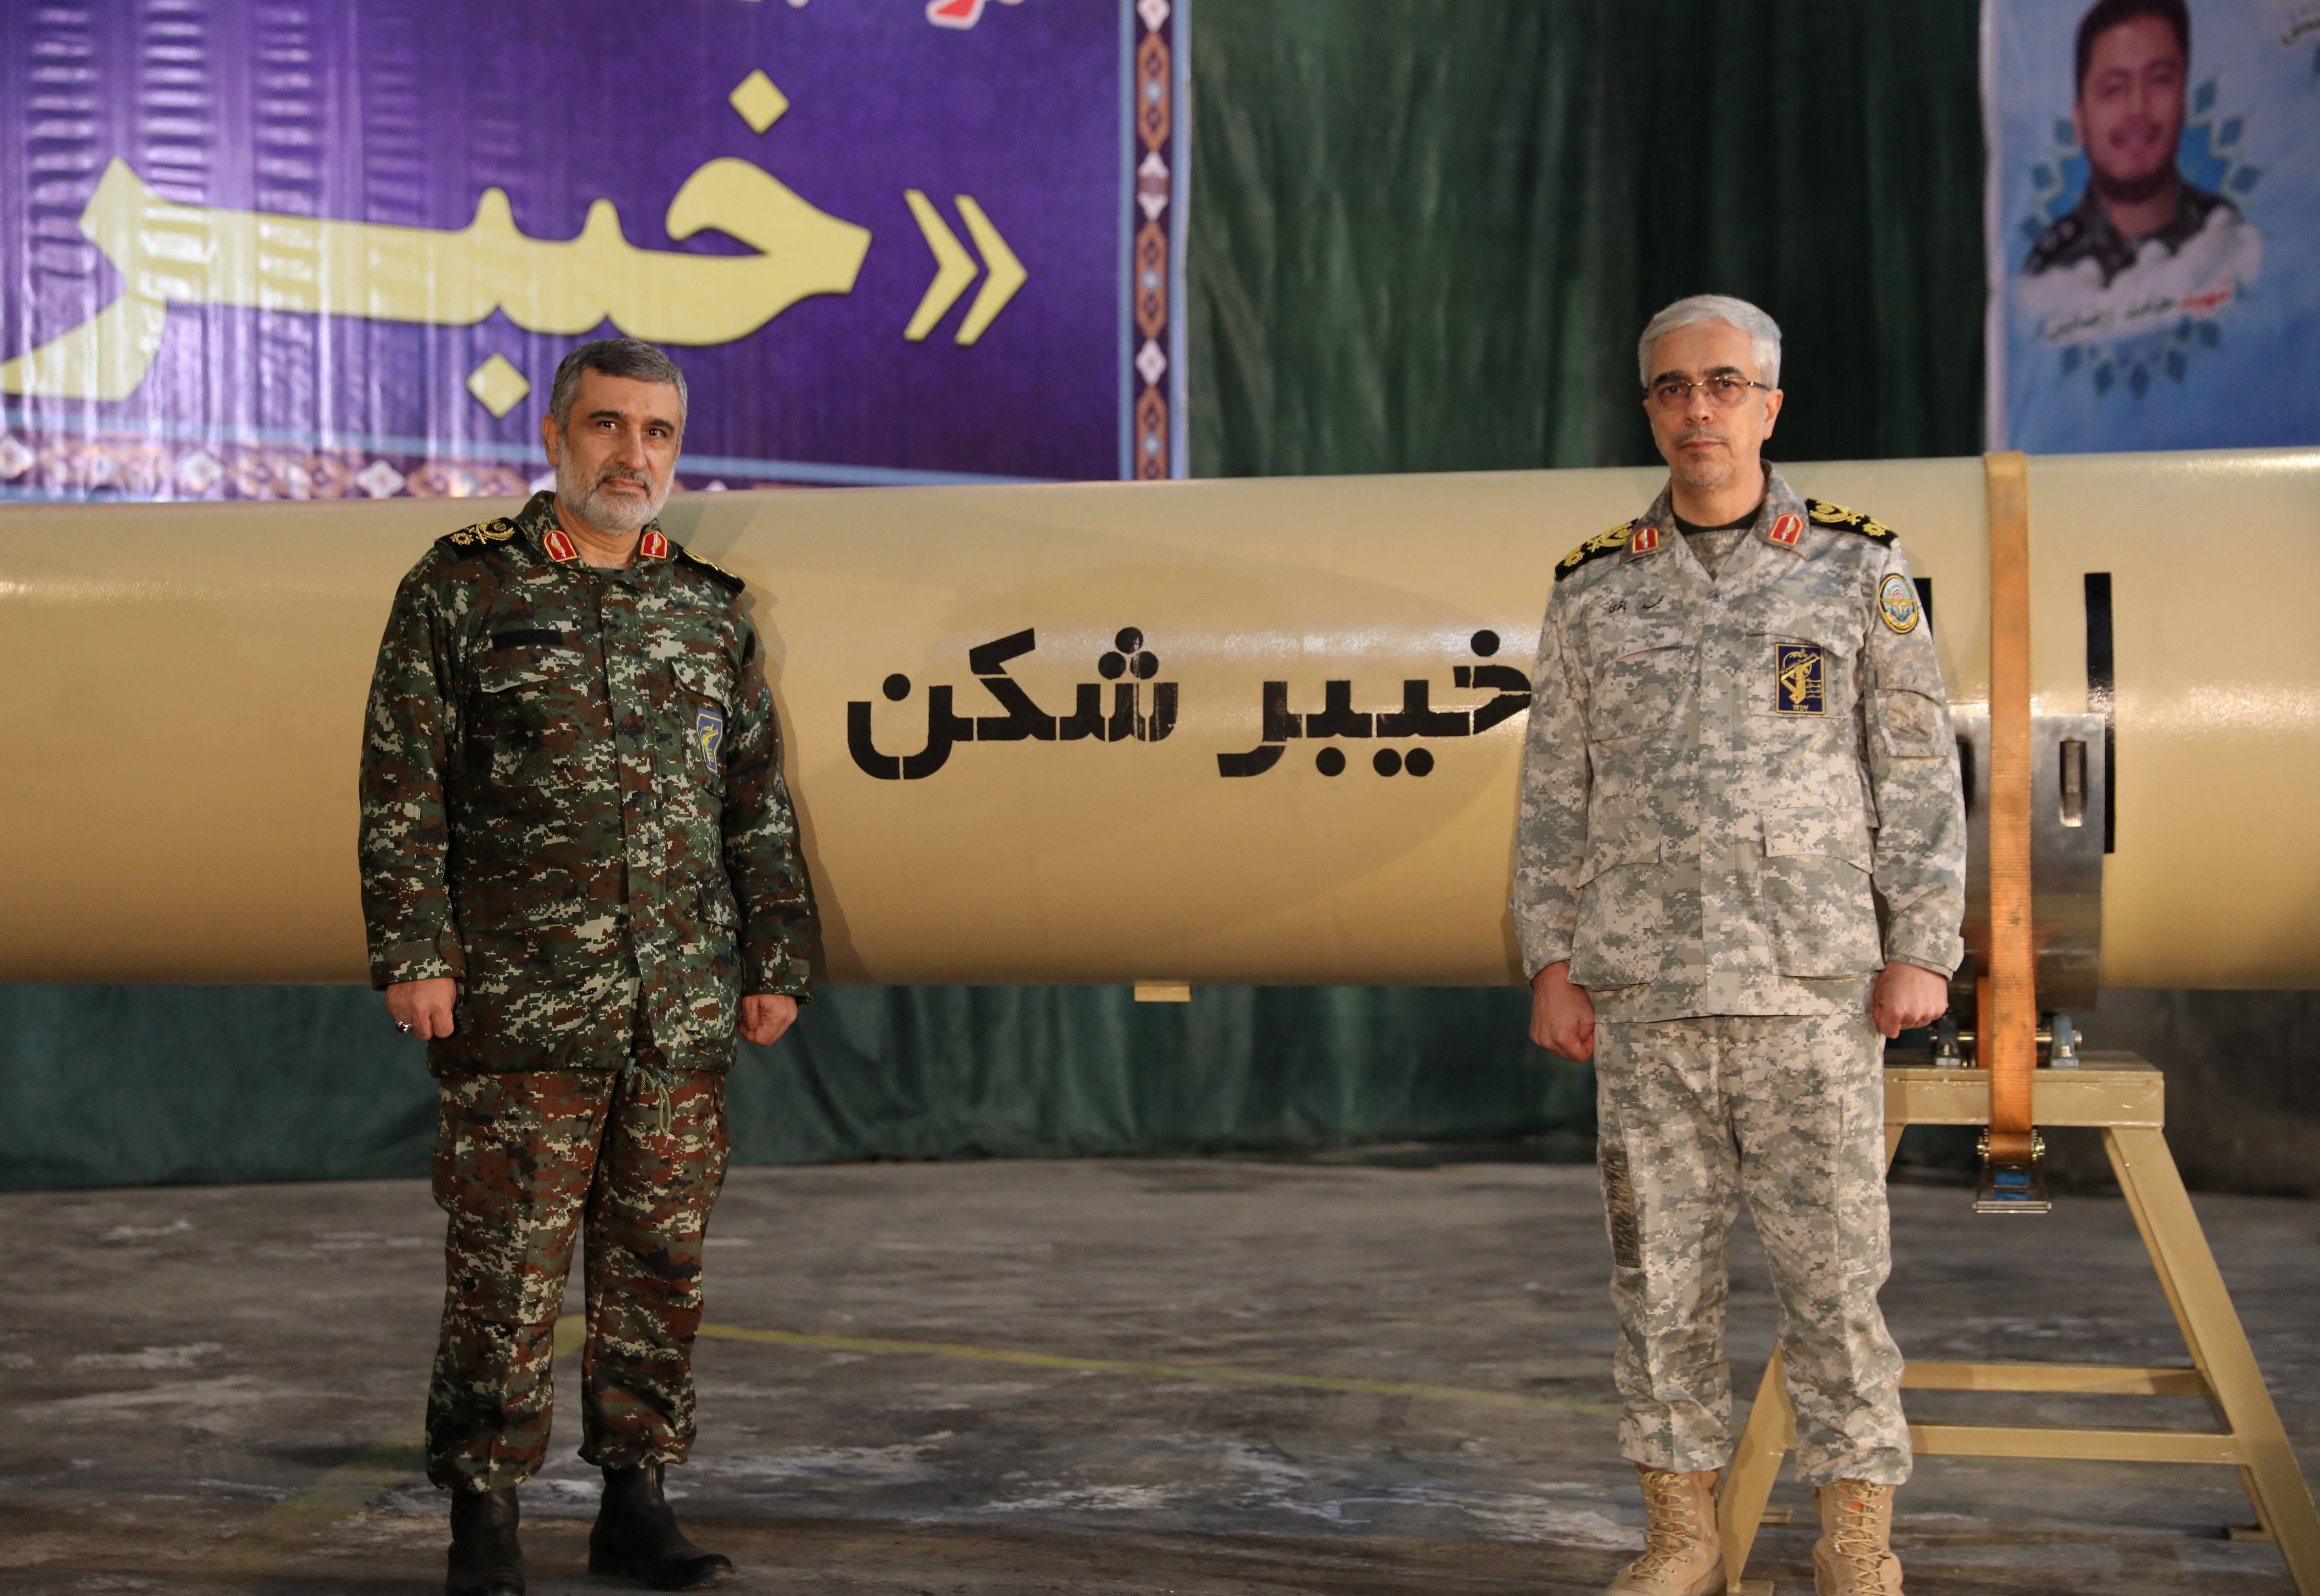 Iranian Armed Forces Chief of Staff Major General Mohammad Bagheri and IRGC Aerospace Force Commander Amir Ali Hajizadeh stand together during the unveiling of "Kheibarshekan" missile at an undisclosed location in Iran